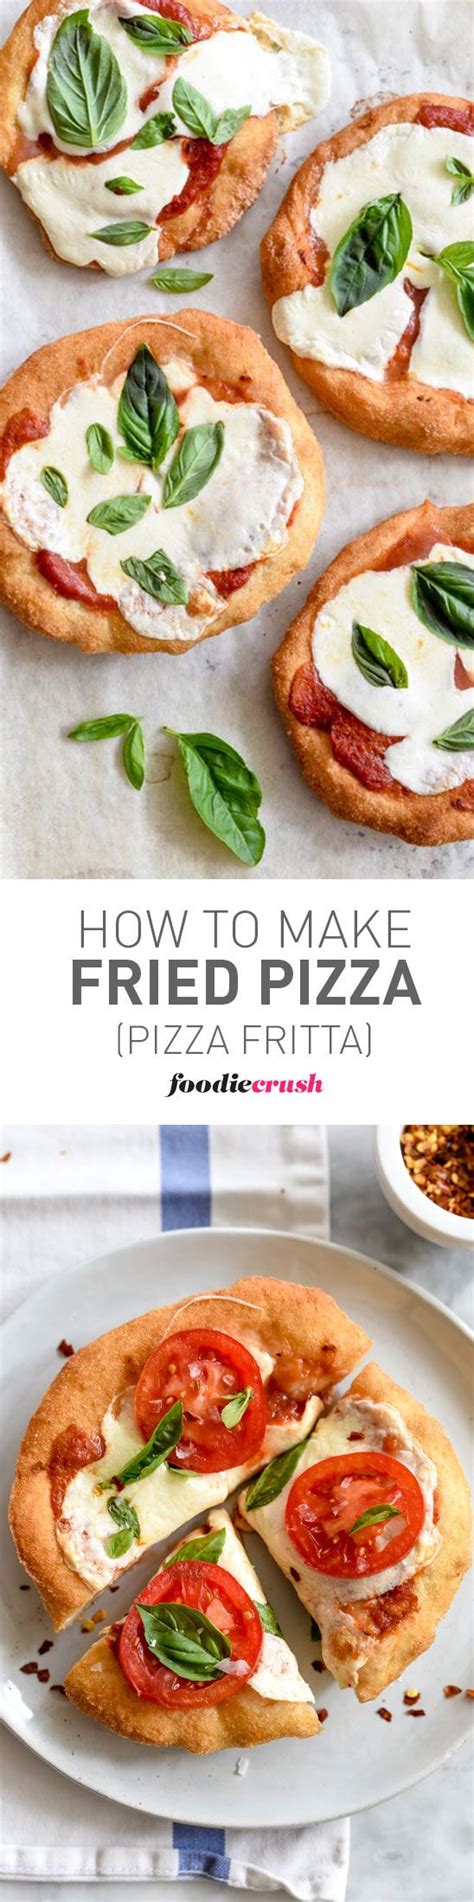 Making pie crust is a lot like riding a bike — it takes a lot of practice before you can pull it off every time. This recipe is great for entertaining. Fry the pizza crust ...